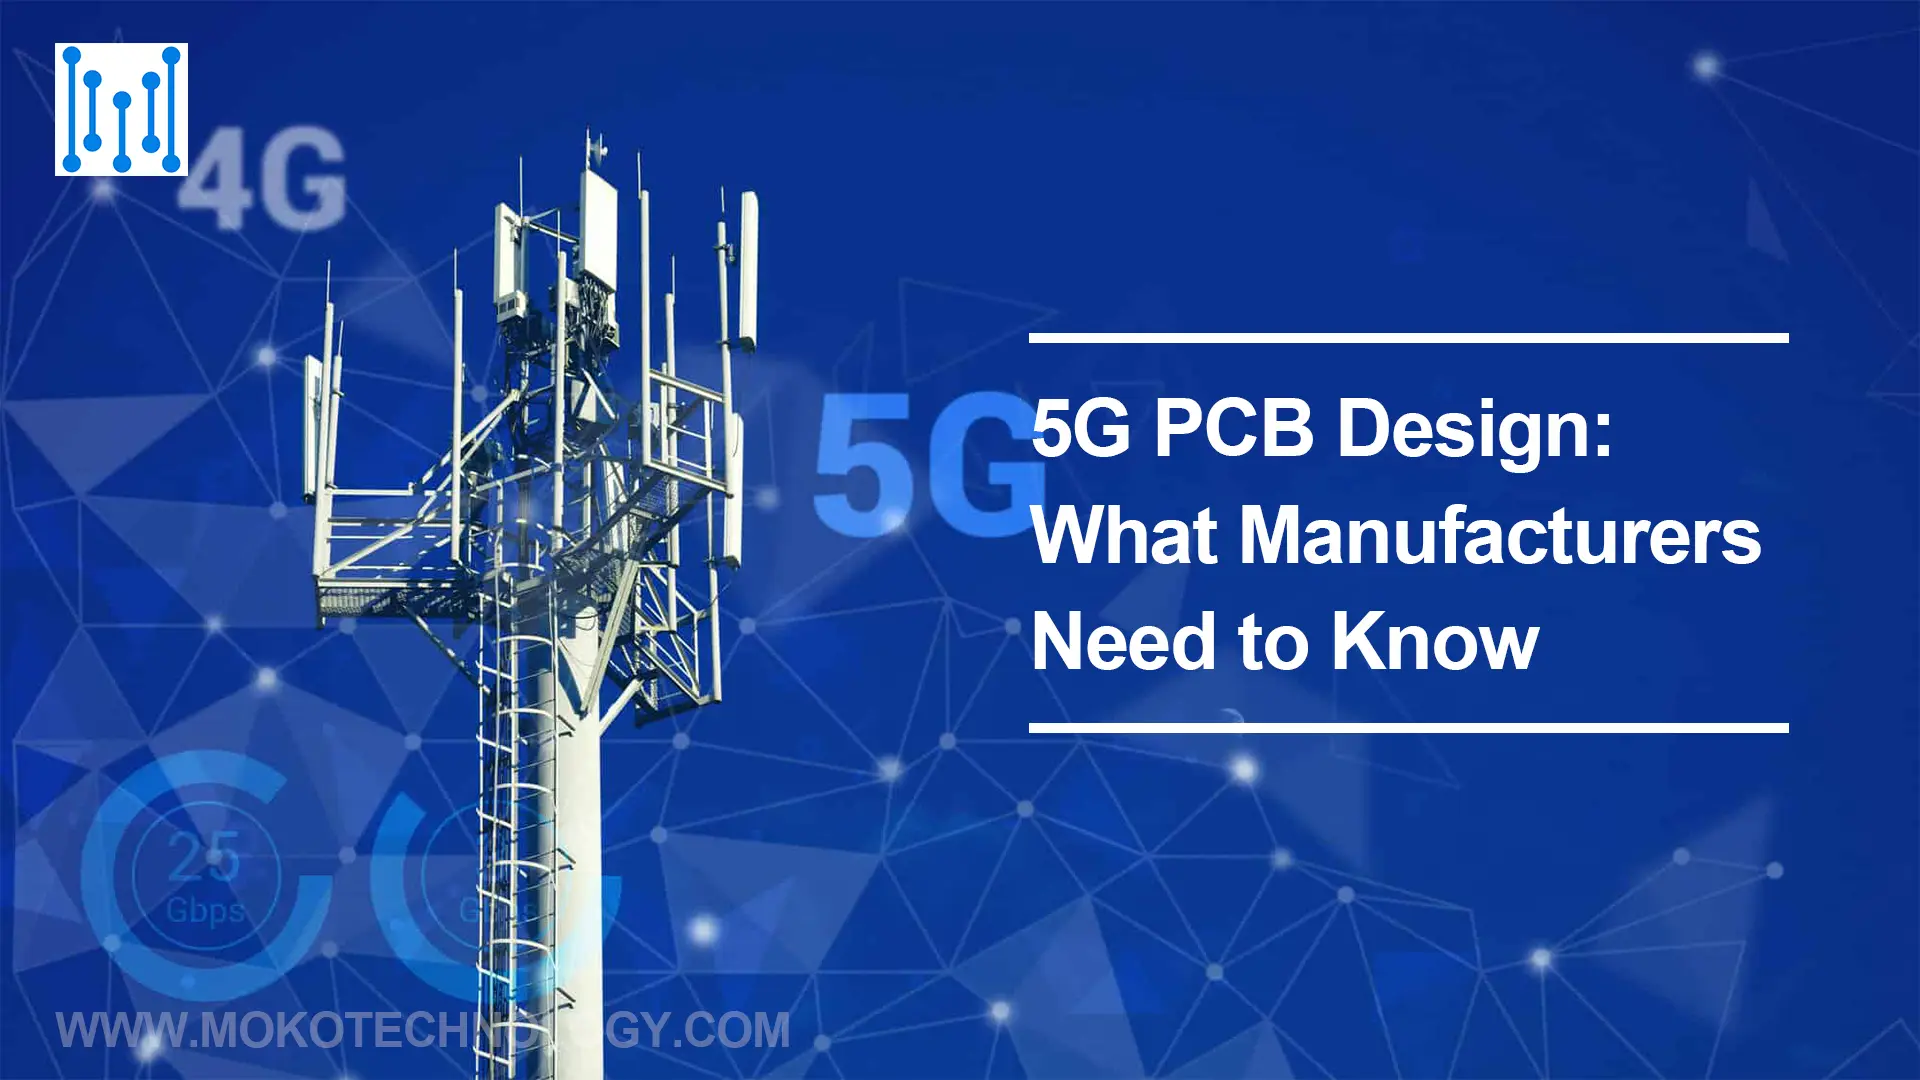 5G PCB Design: What Manufacturers Need to Know